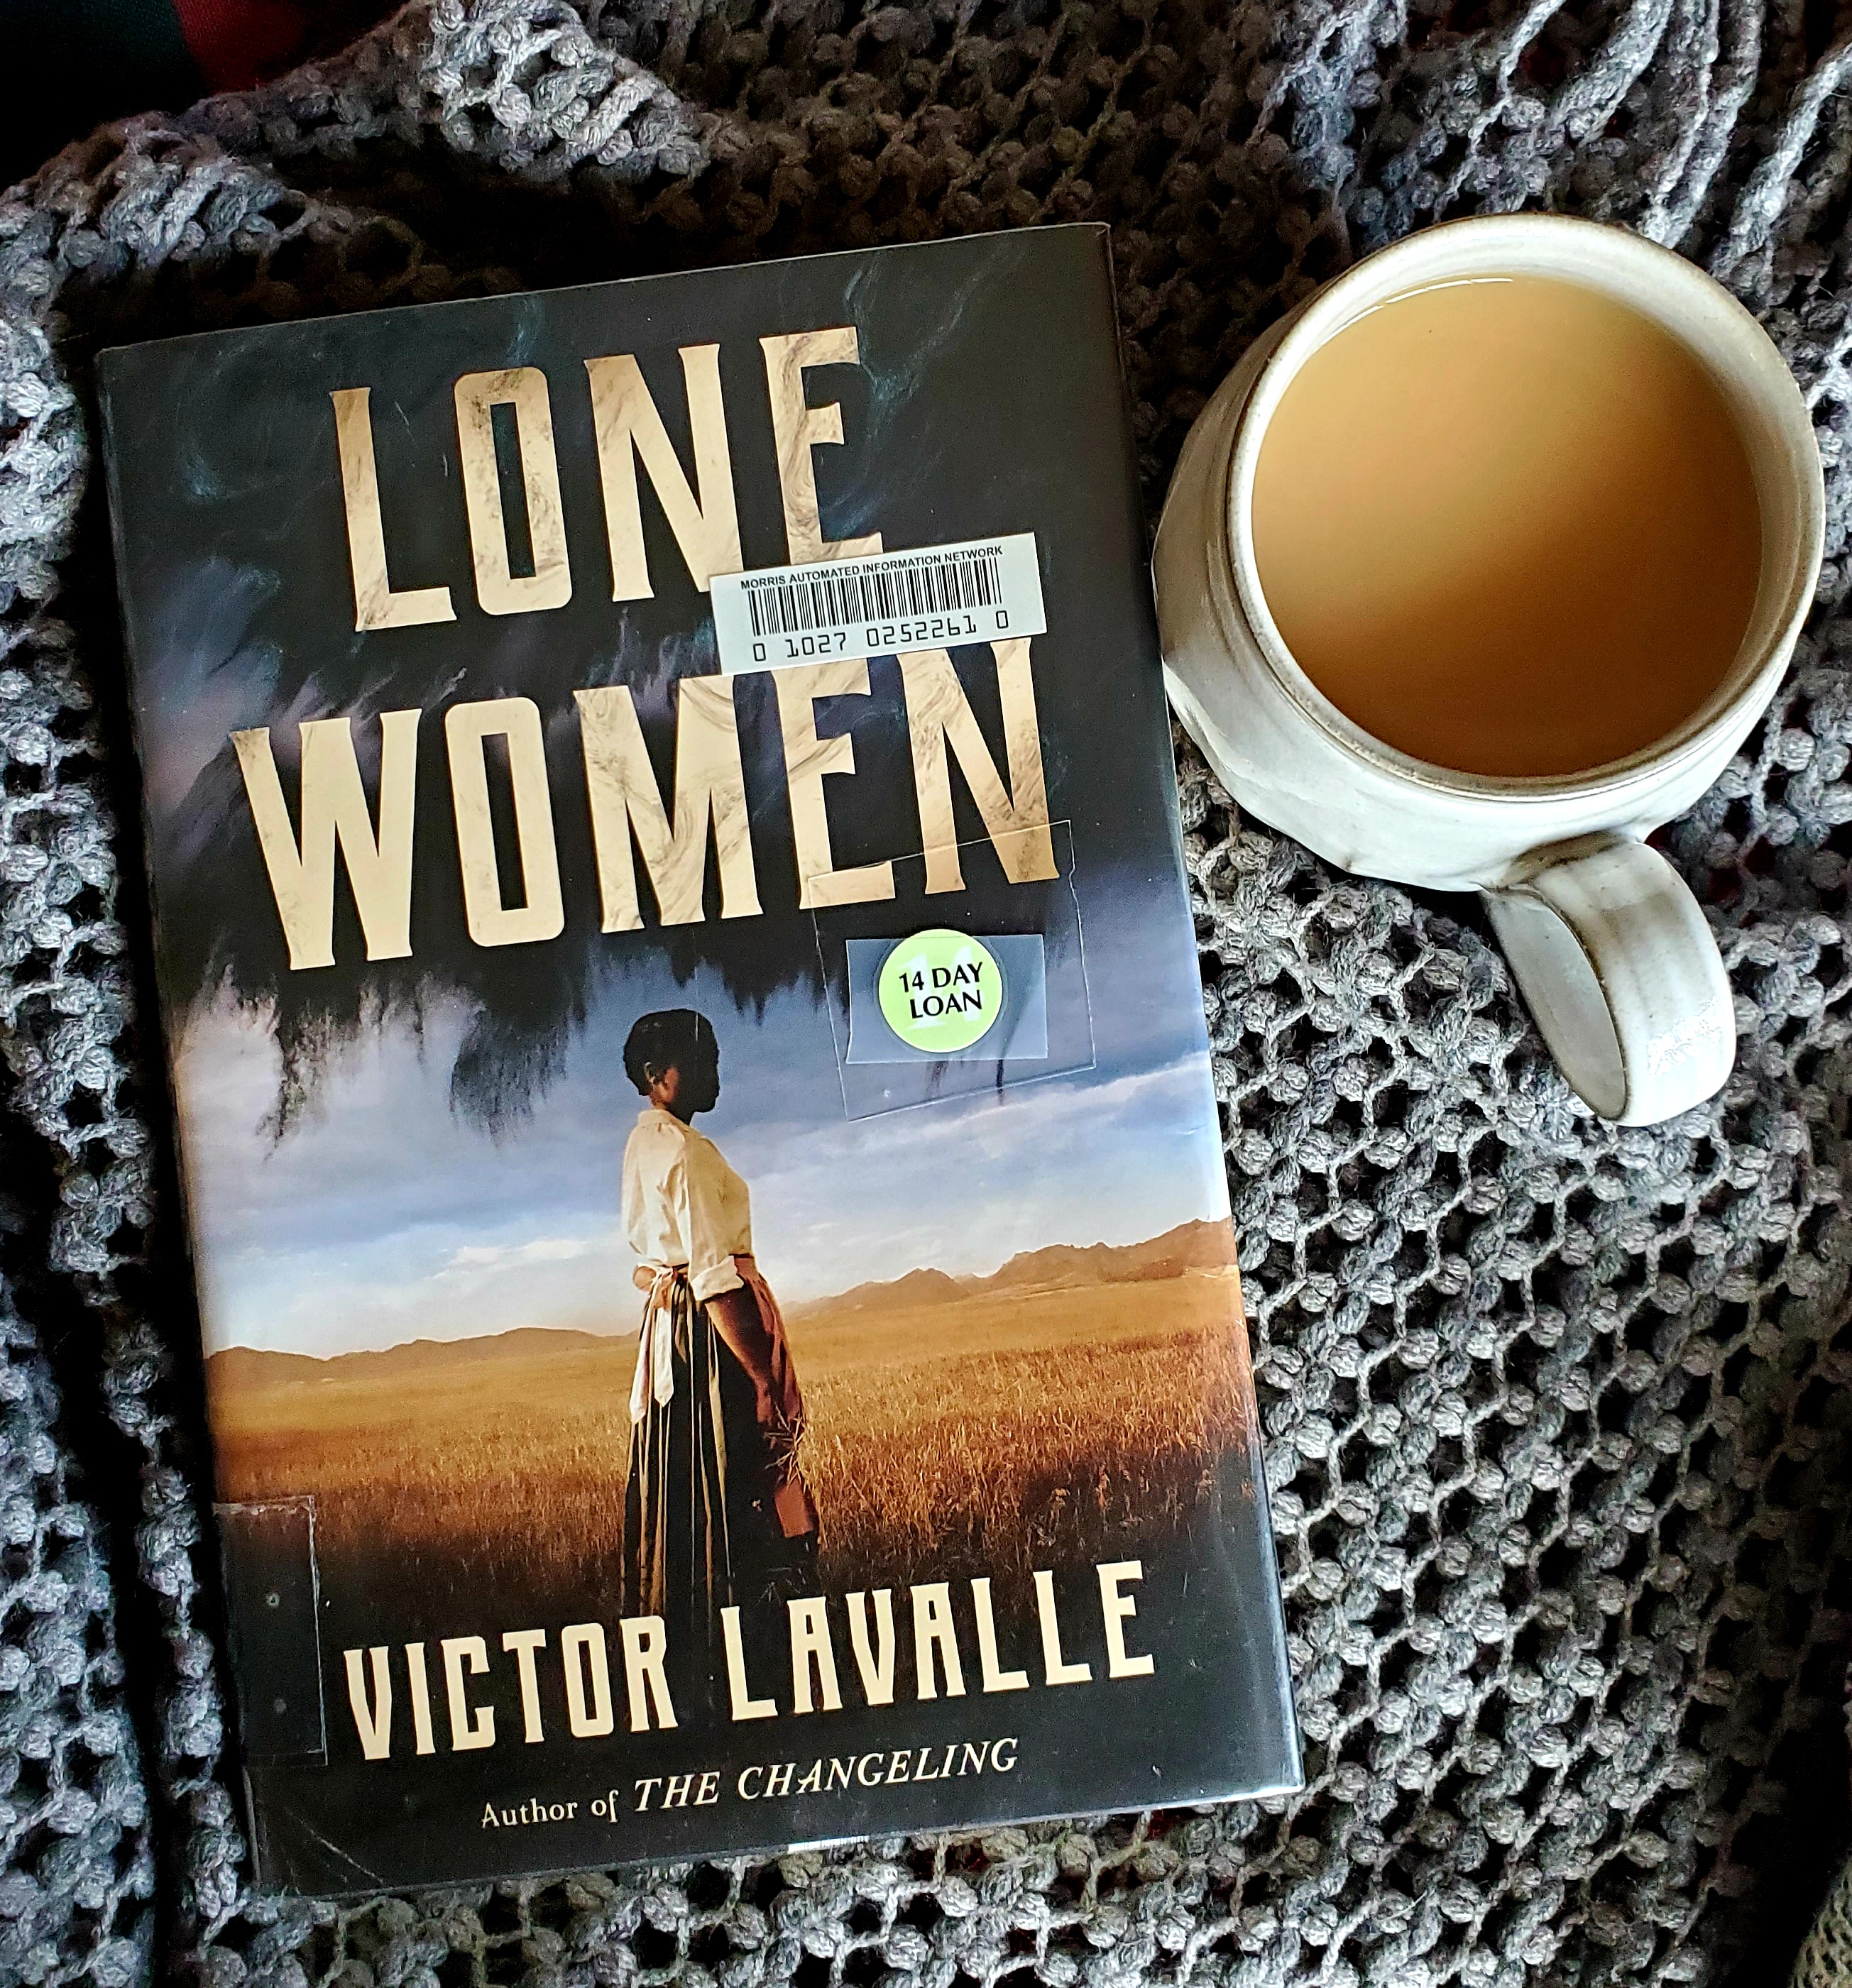 Book Cover of Lone Women by Victor LaValle, cup of tea